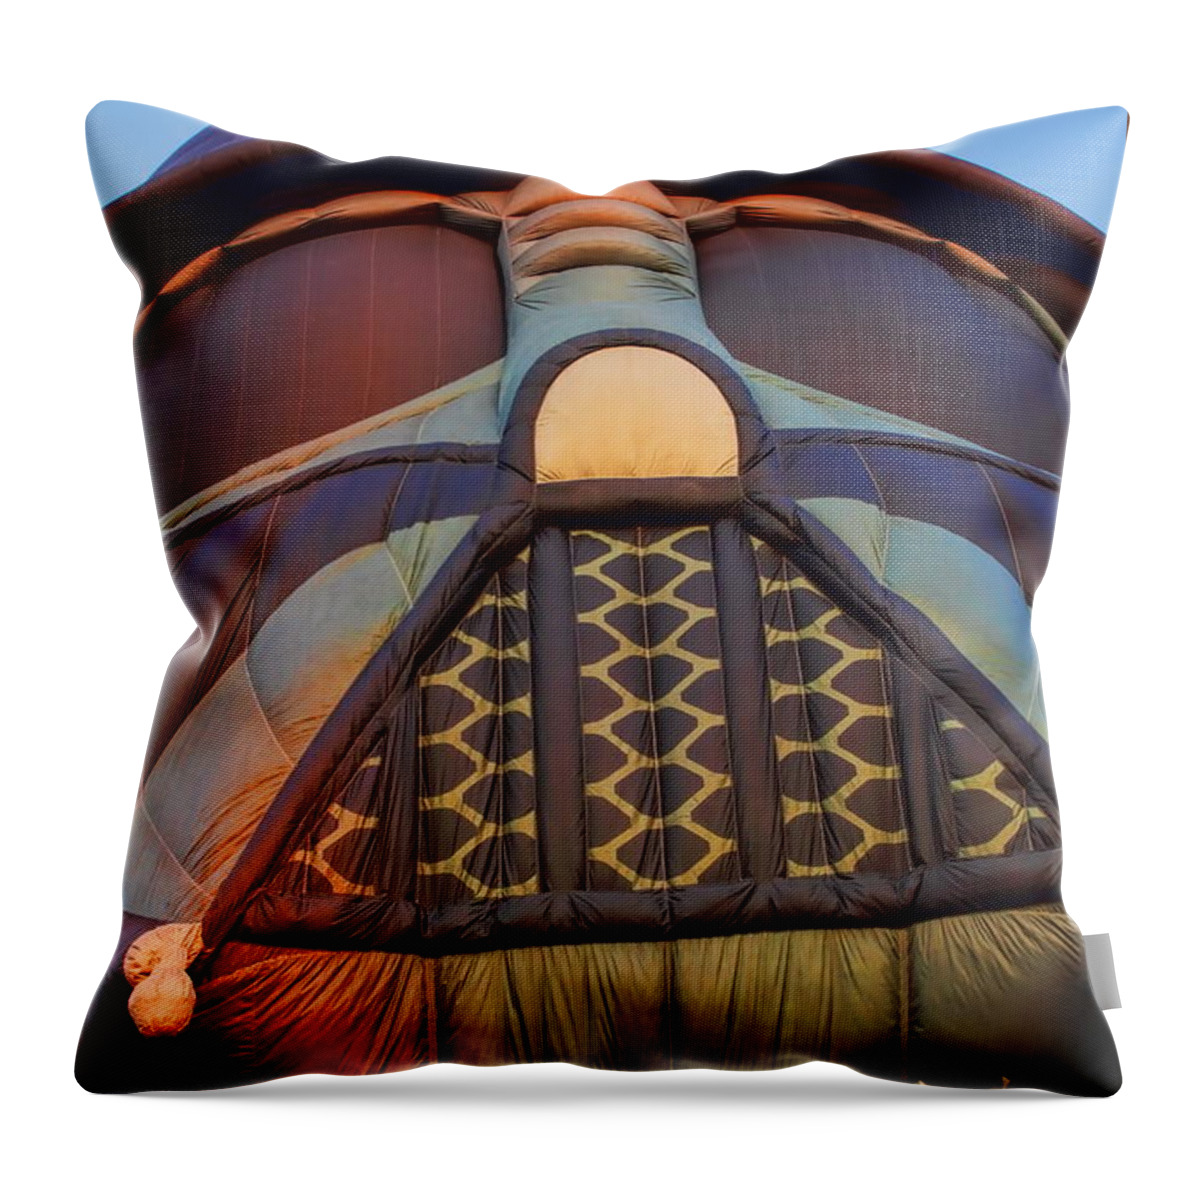 Wausau Throw Pillow featuring the photograph Looking Up At The Darth Vader Hot Air Balloon by Dale Kauzlaric